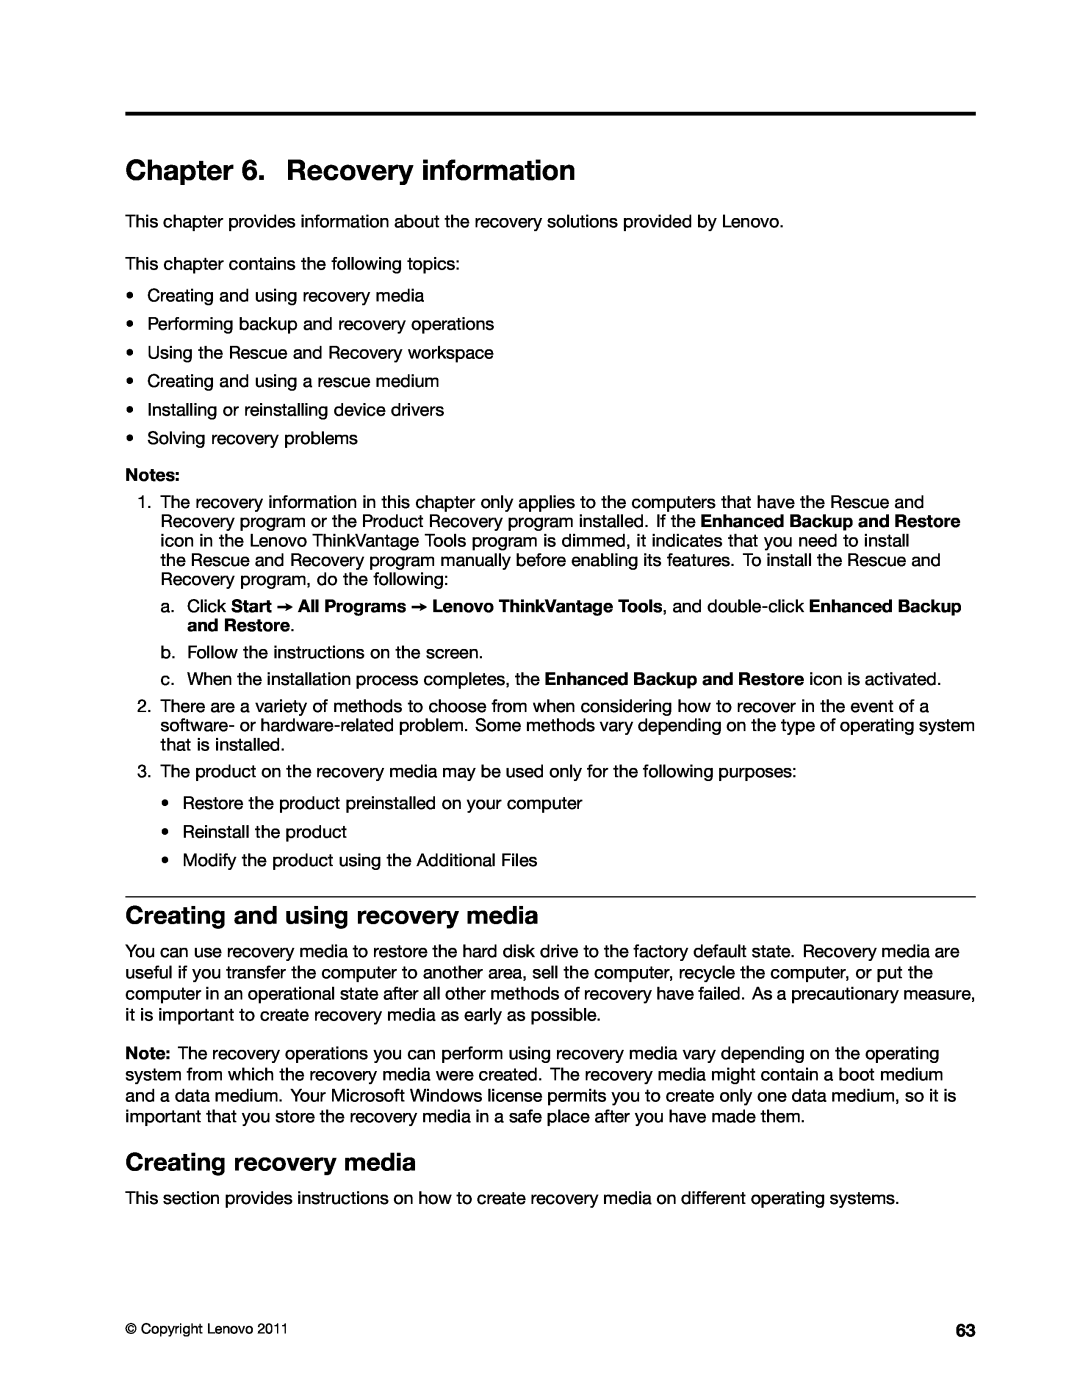 Lenovo 3157, 7339, 5039, 5033, 3167, 3171 Recovery information, Creating and using recovery media, Creating recovery media 